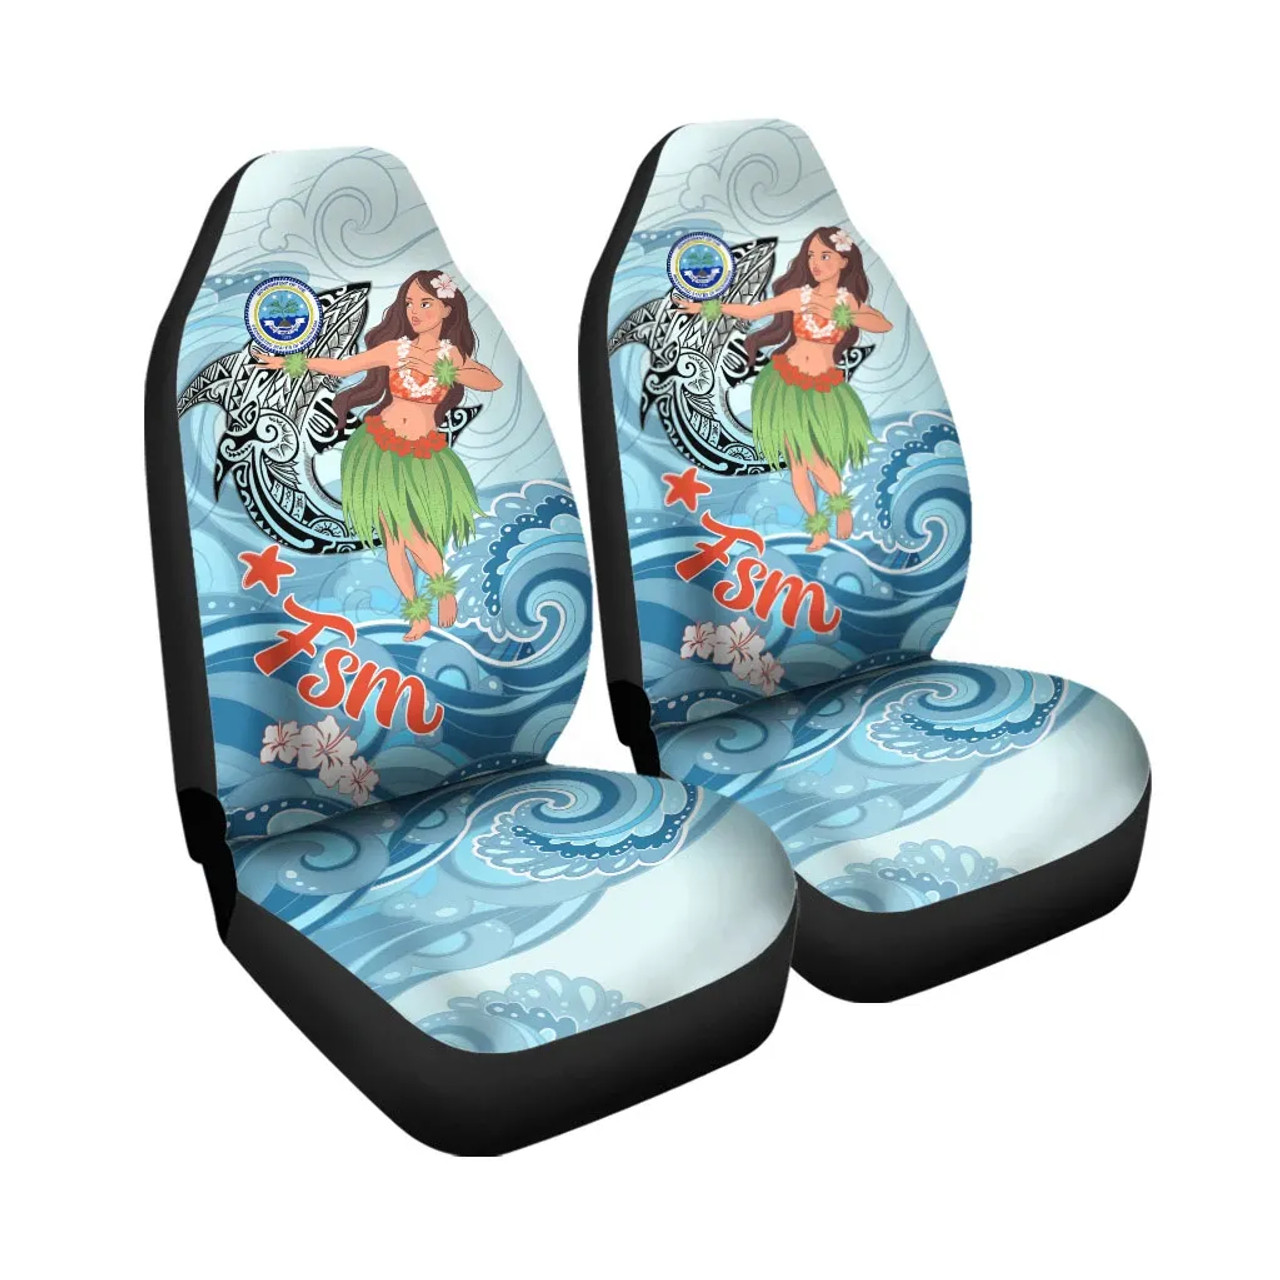 Federated States of Micronesia Car Seat Cover - Polynesian Girls With Shark